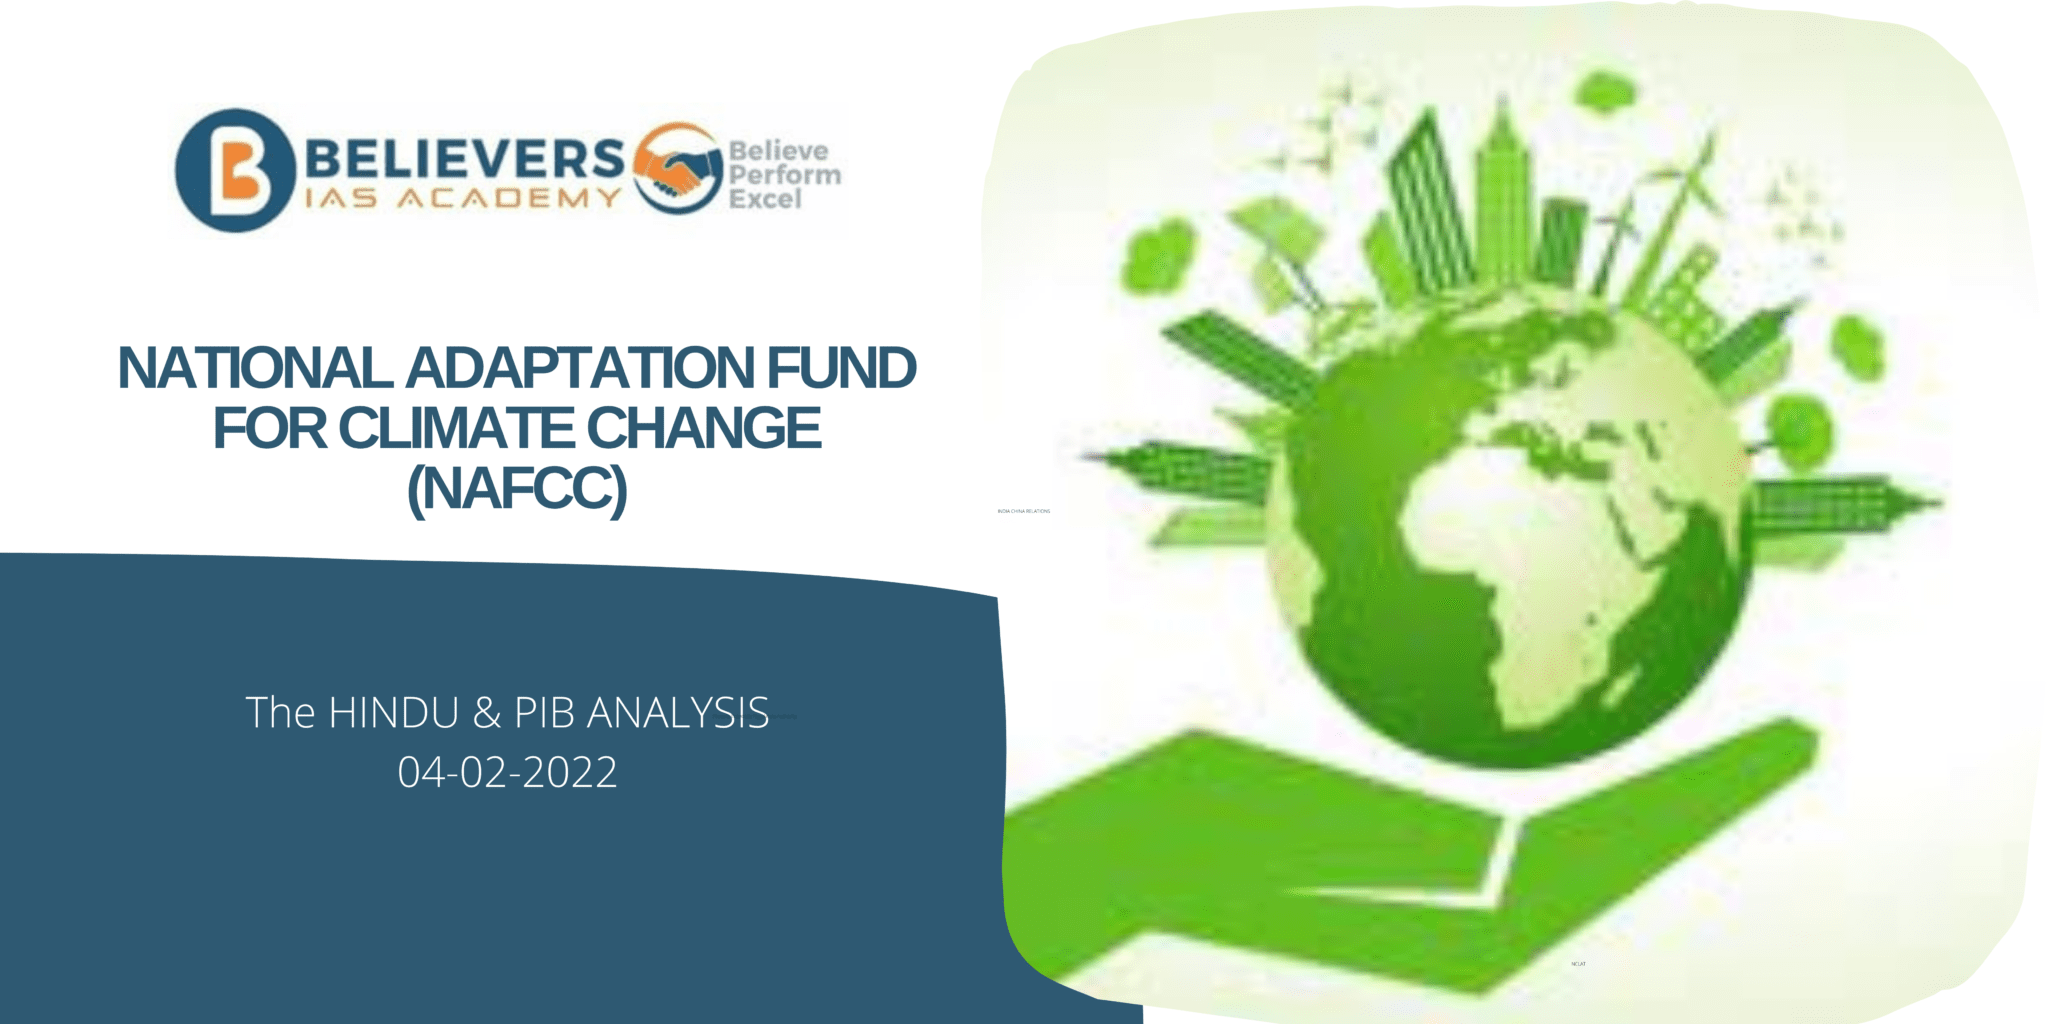 National Adaptation Fund for Climate Change (NAFCC) Believers IAS Academy